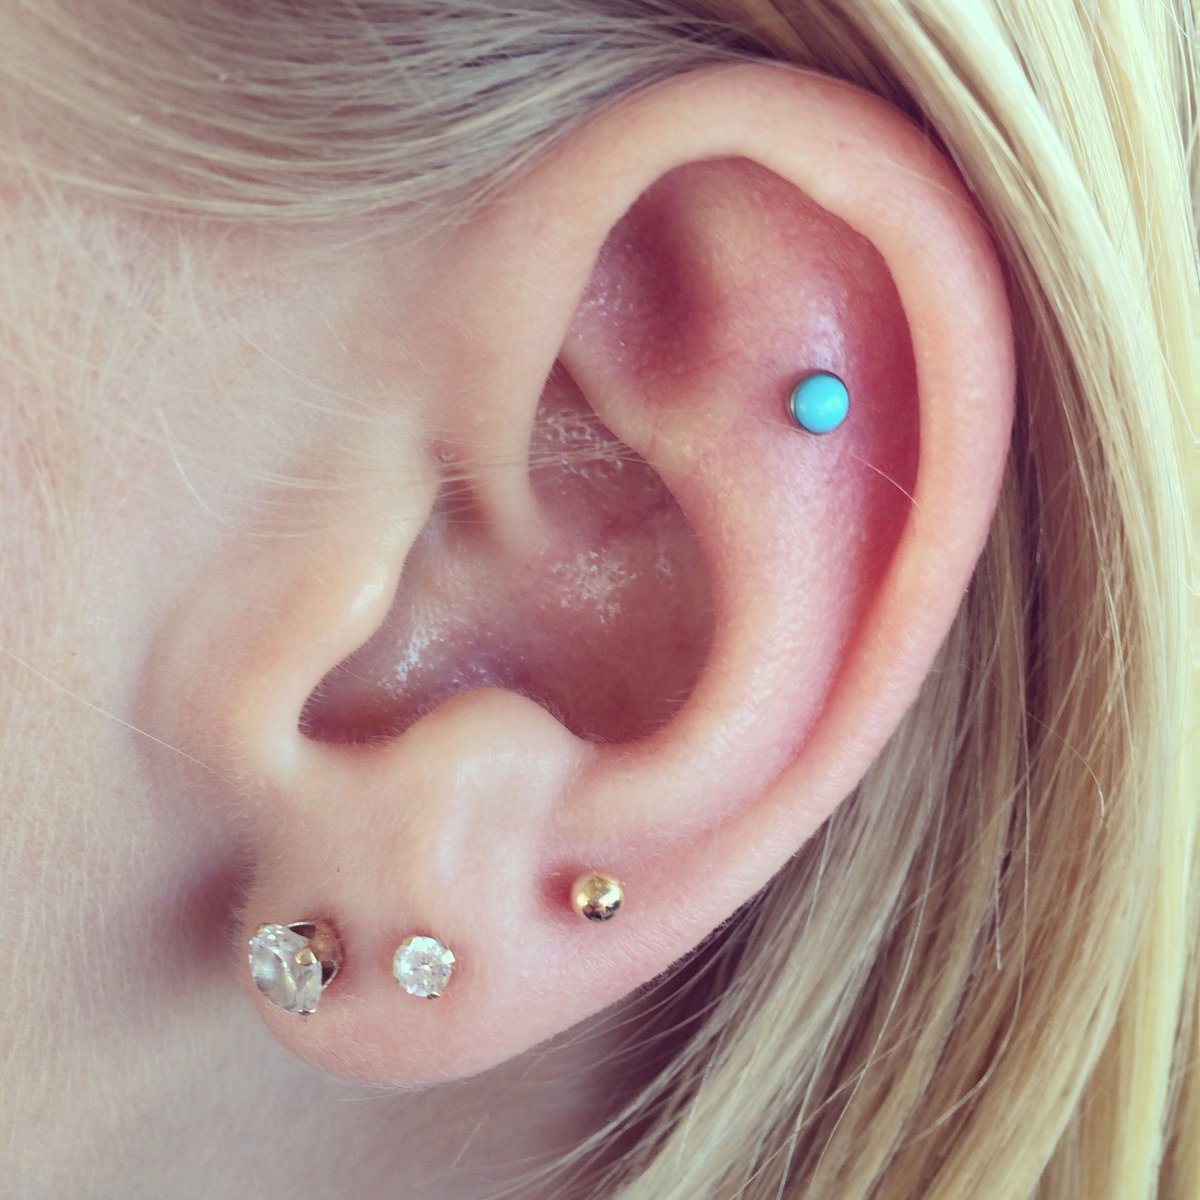 FLAT HELIX PIERCING SERVICES | LOOKTATTOO